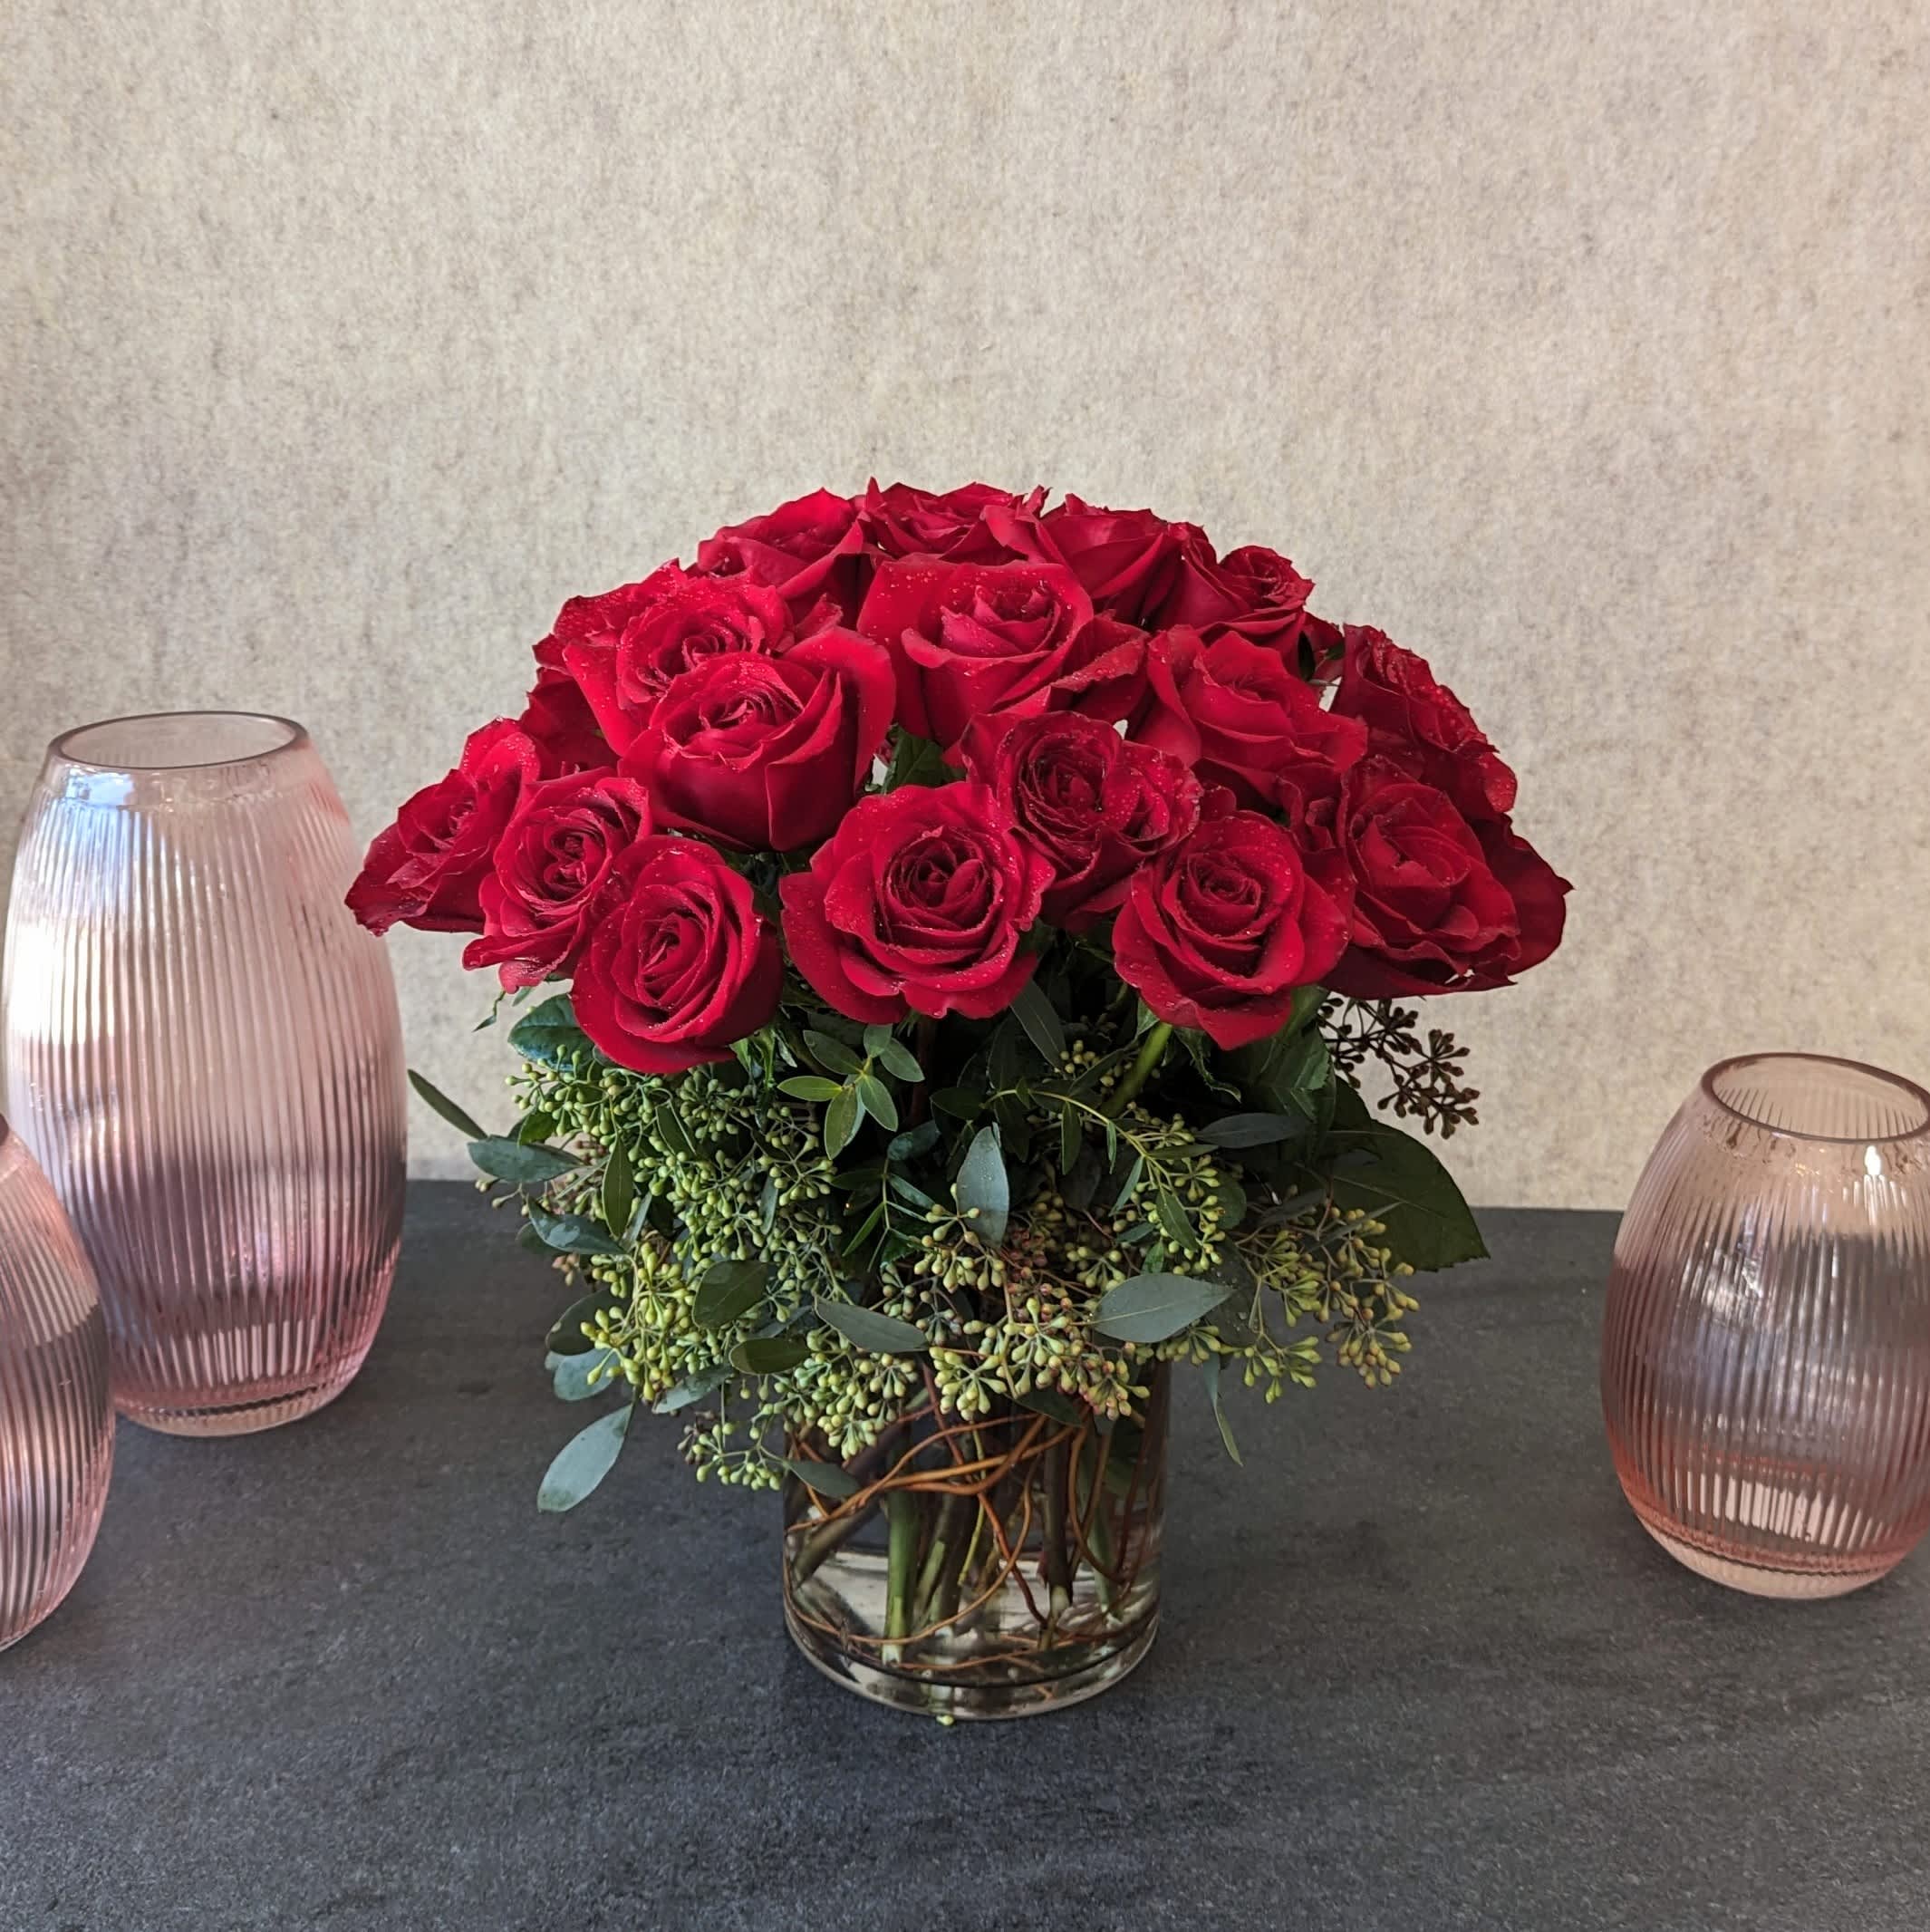 Rose Love - Our Standard Rose Love arrangement features two dozen rich, red roses artfully arranged in a clear glass cylinder. Sleek and stylish, These premium Ecuadorian-sourced blooms speak volumes of love without saying a word.  The photo is shown in the Premium version. Also available in lavender, orange, peach, pink, purple, white, or yellow. Please note your preferred color in the special instructions.   